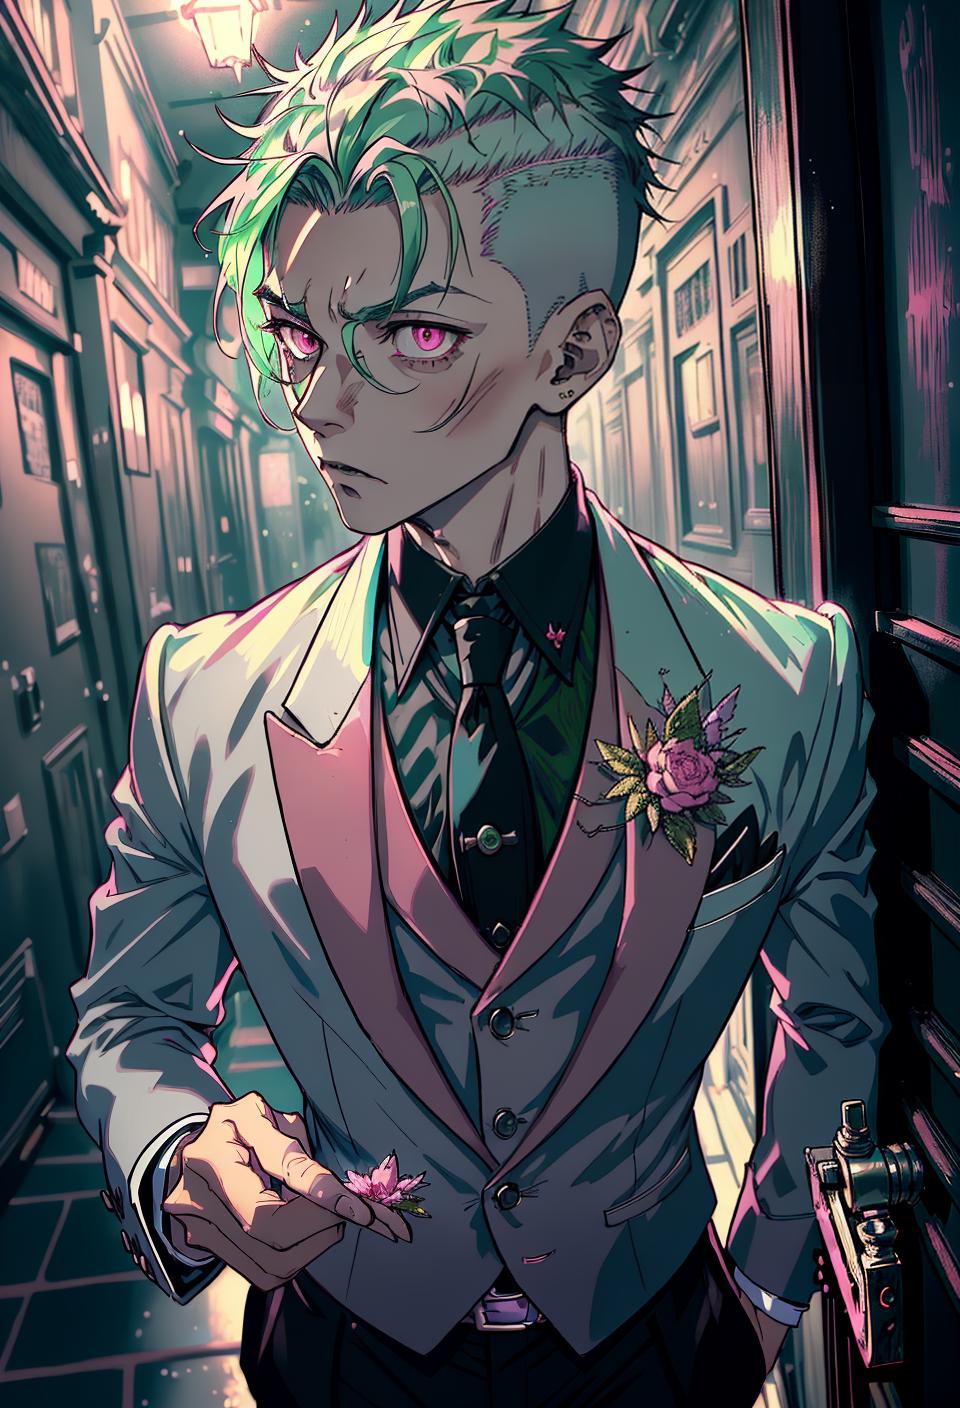  ((trending, highres, masterpiece, cinematic shot)), 1boy, mature, male formal wear, graveyard scene, very short spiked light green hair, shaved head, large pink eyes, personality, scared expression, grey skin, orderly, limber